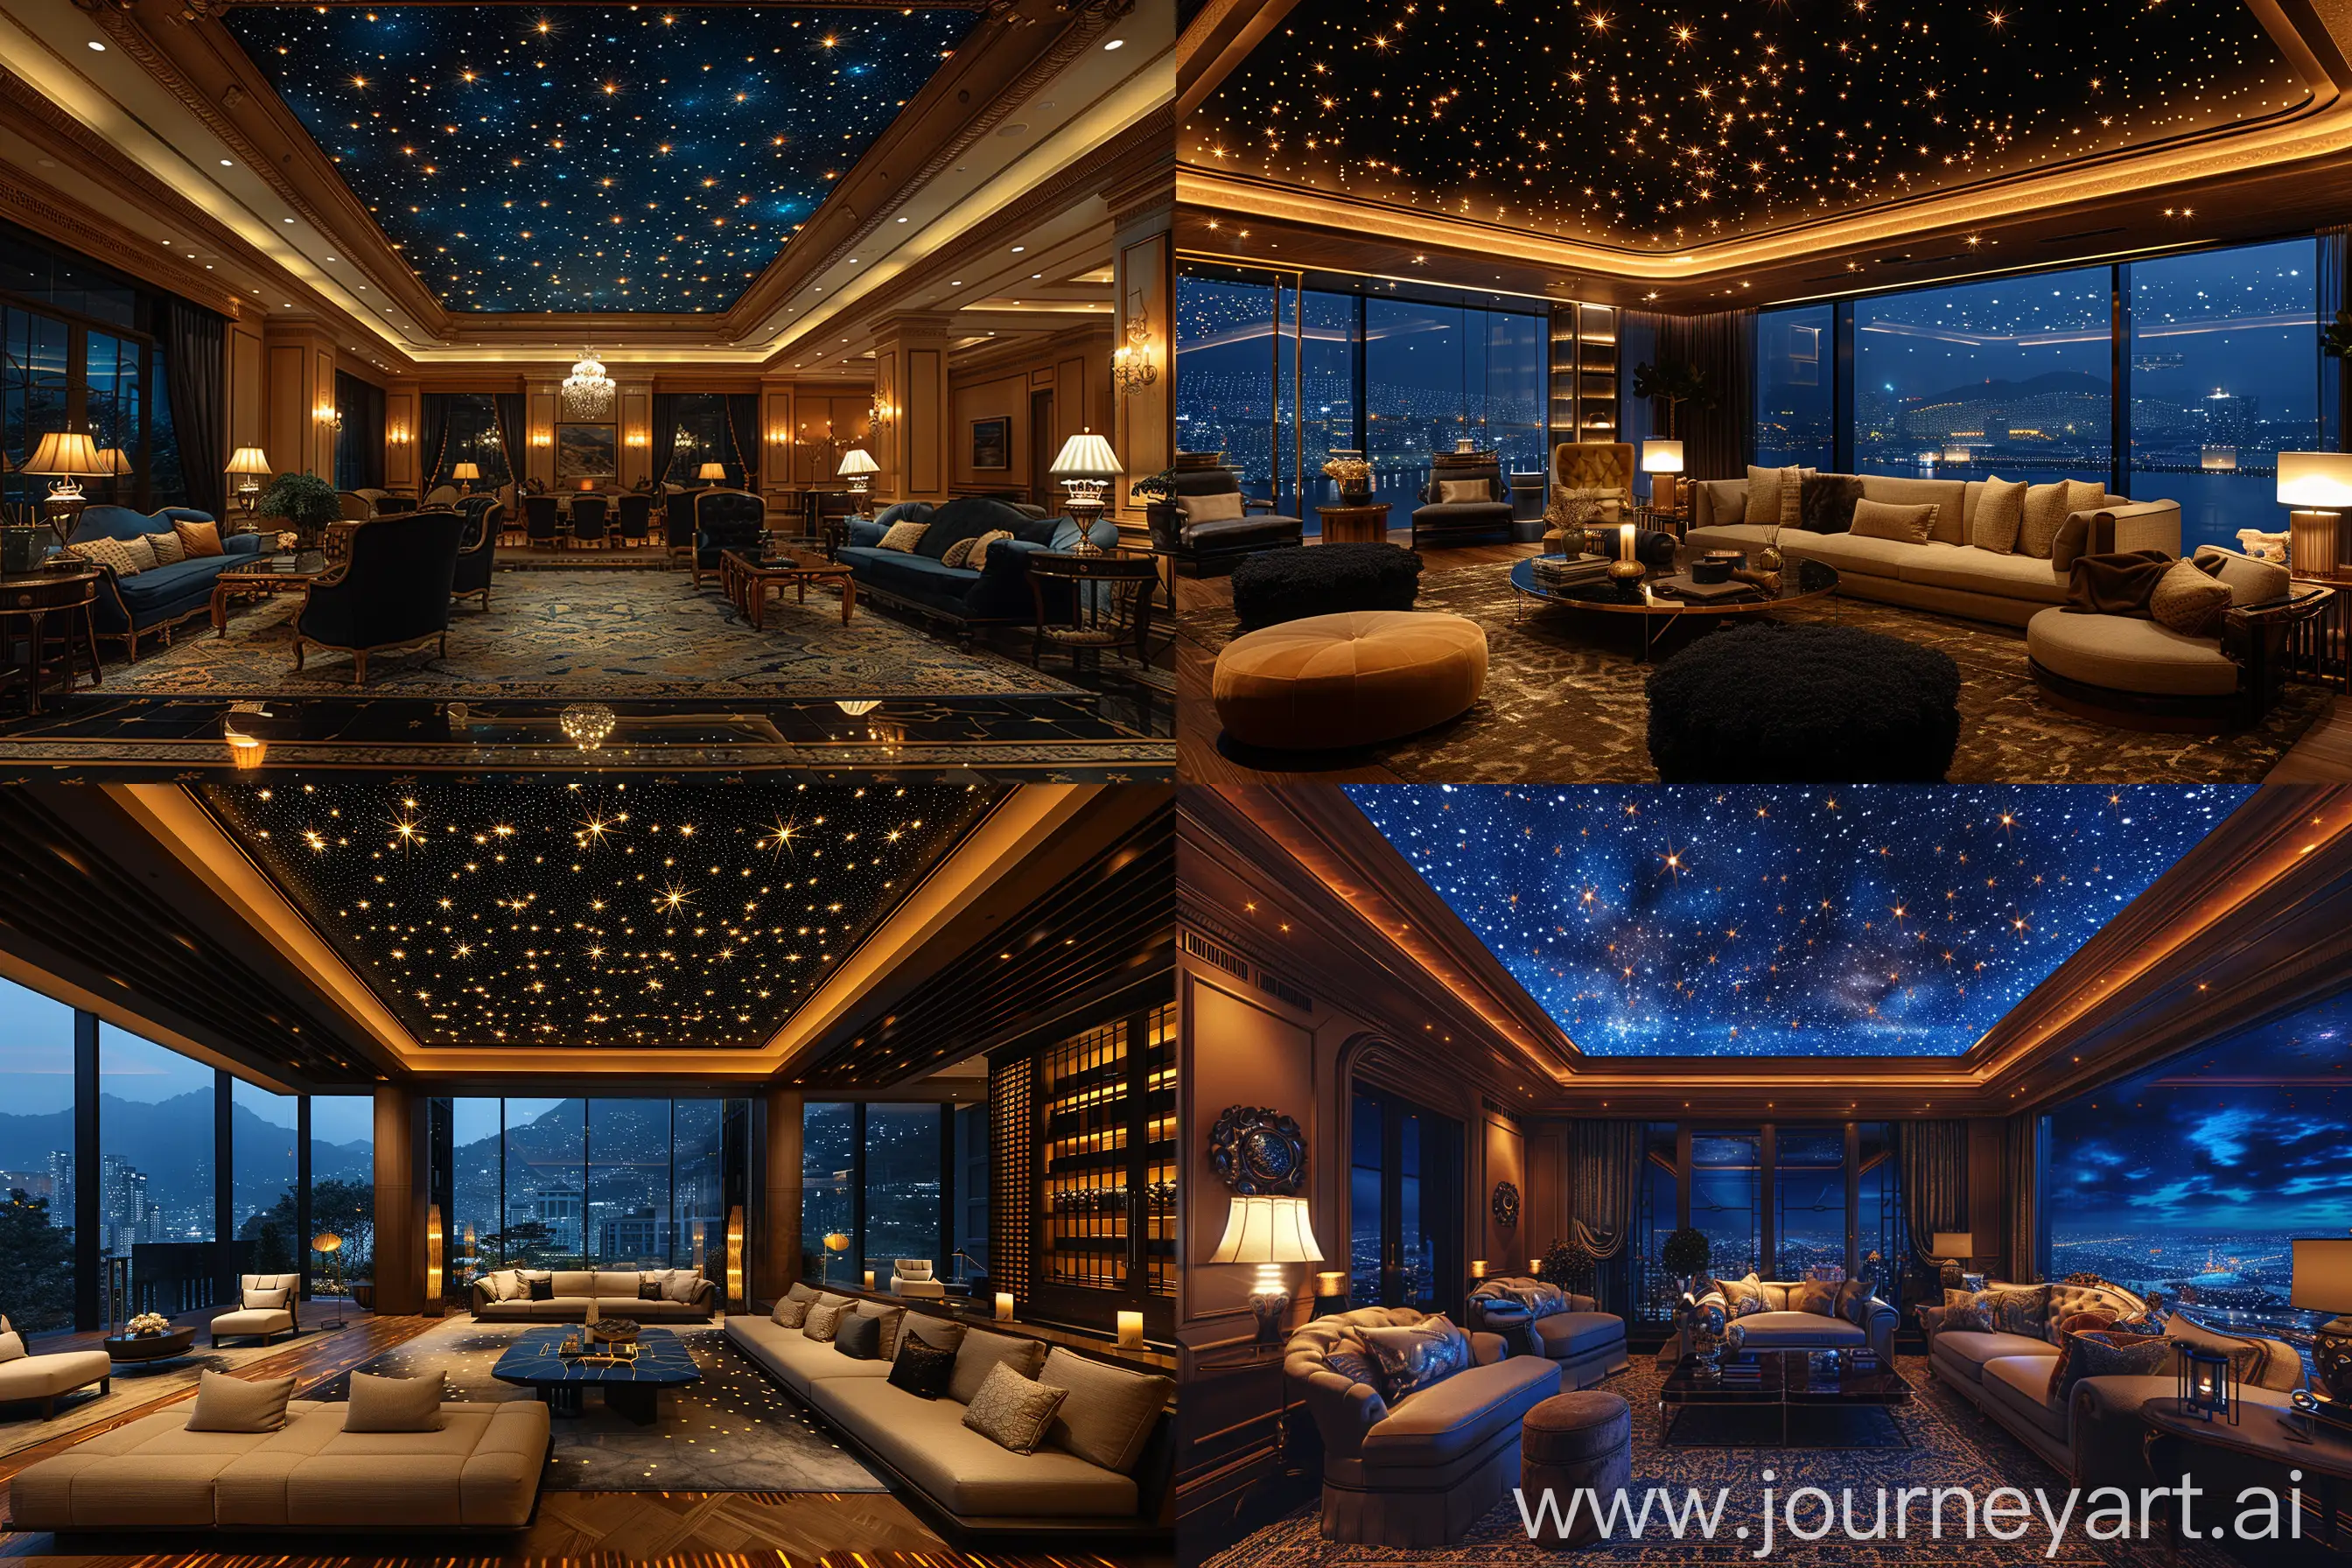 Luxurious-Starlit-Room-Interior-with-Intimate-Glow